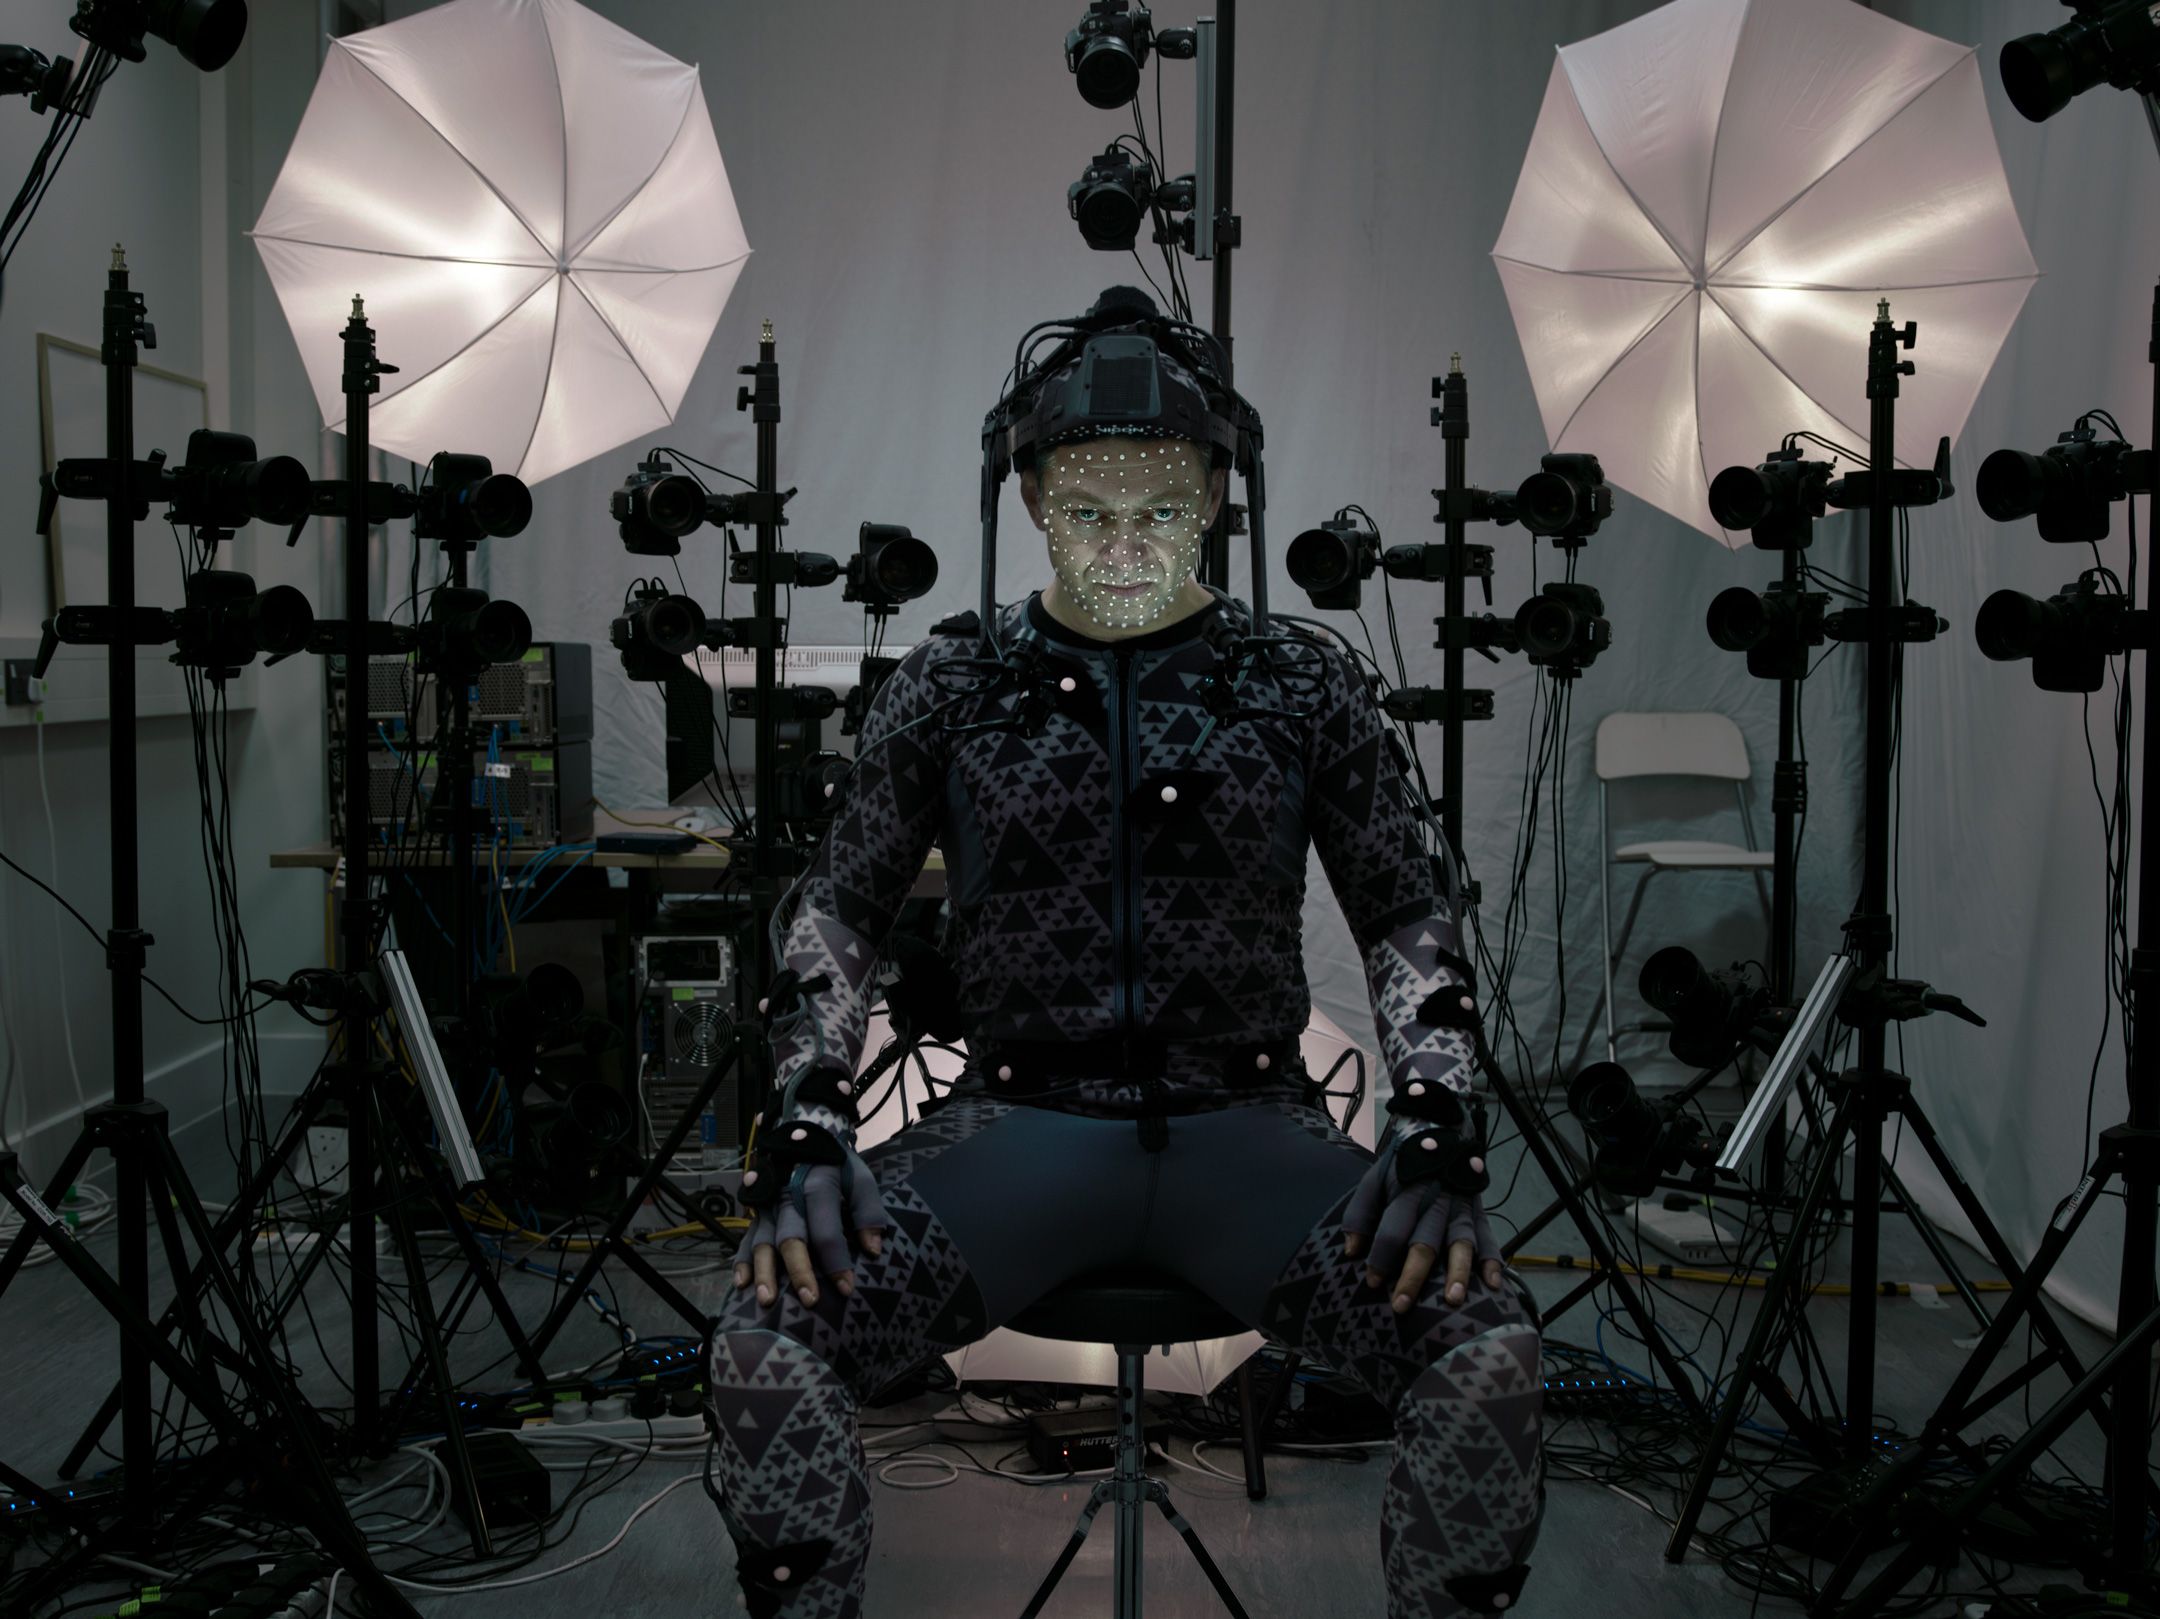 Star Wars: The Force Awakens Andy Serkis Photo